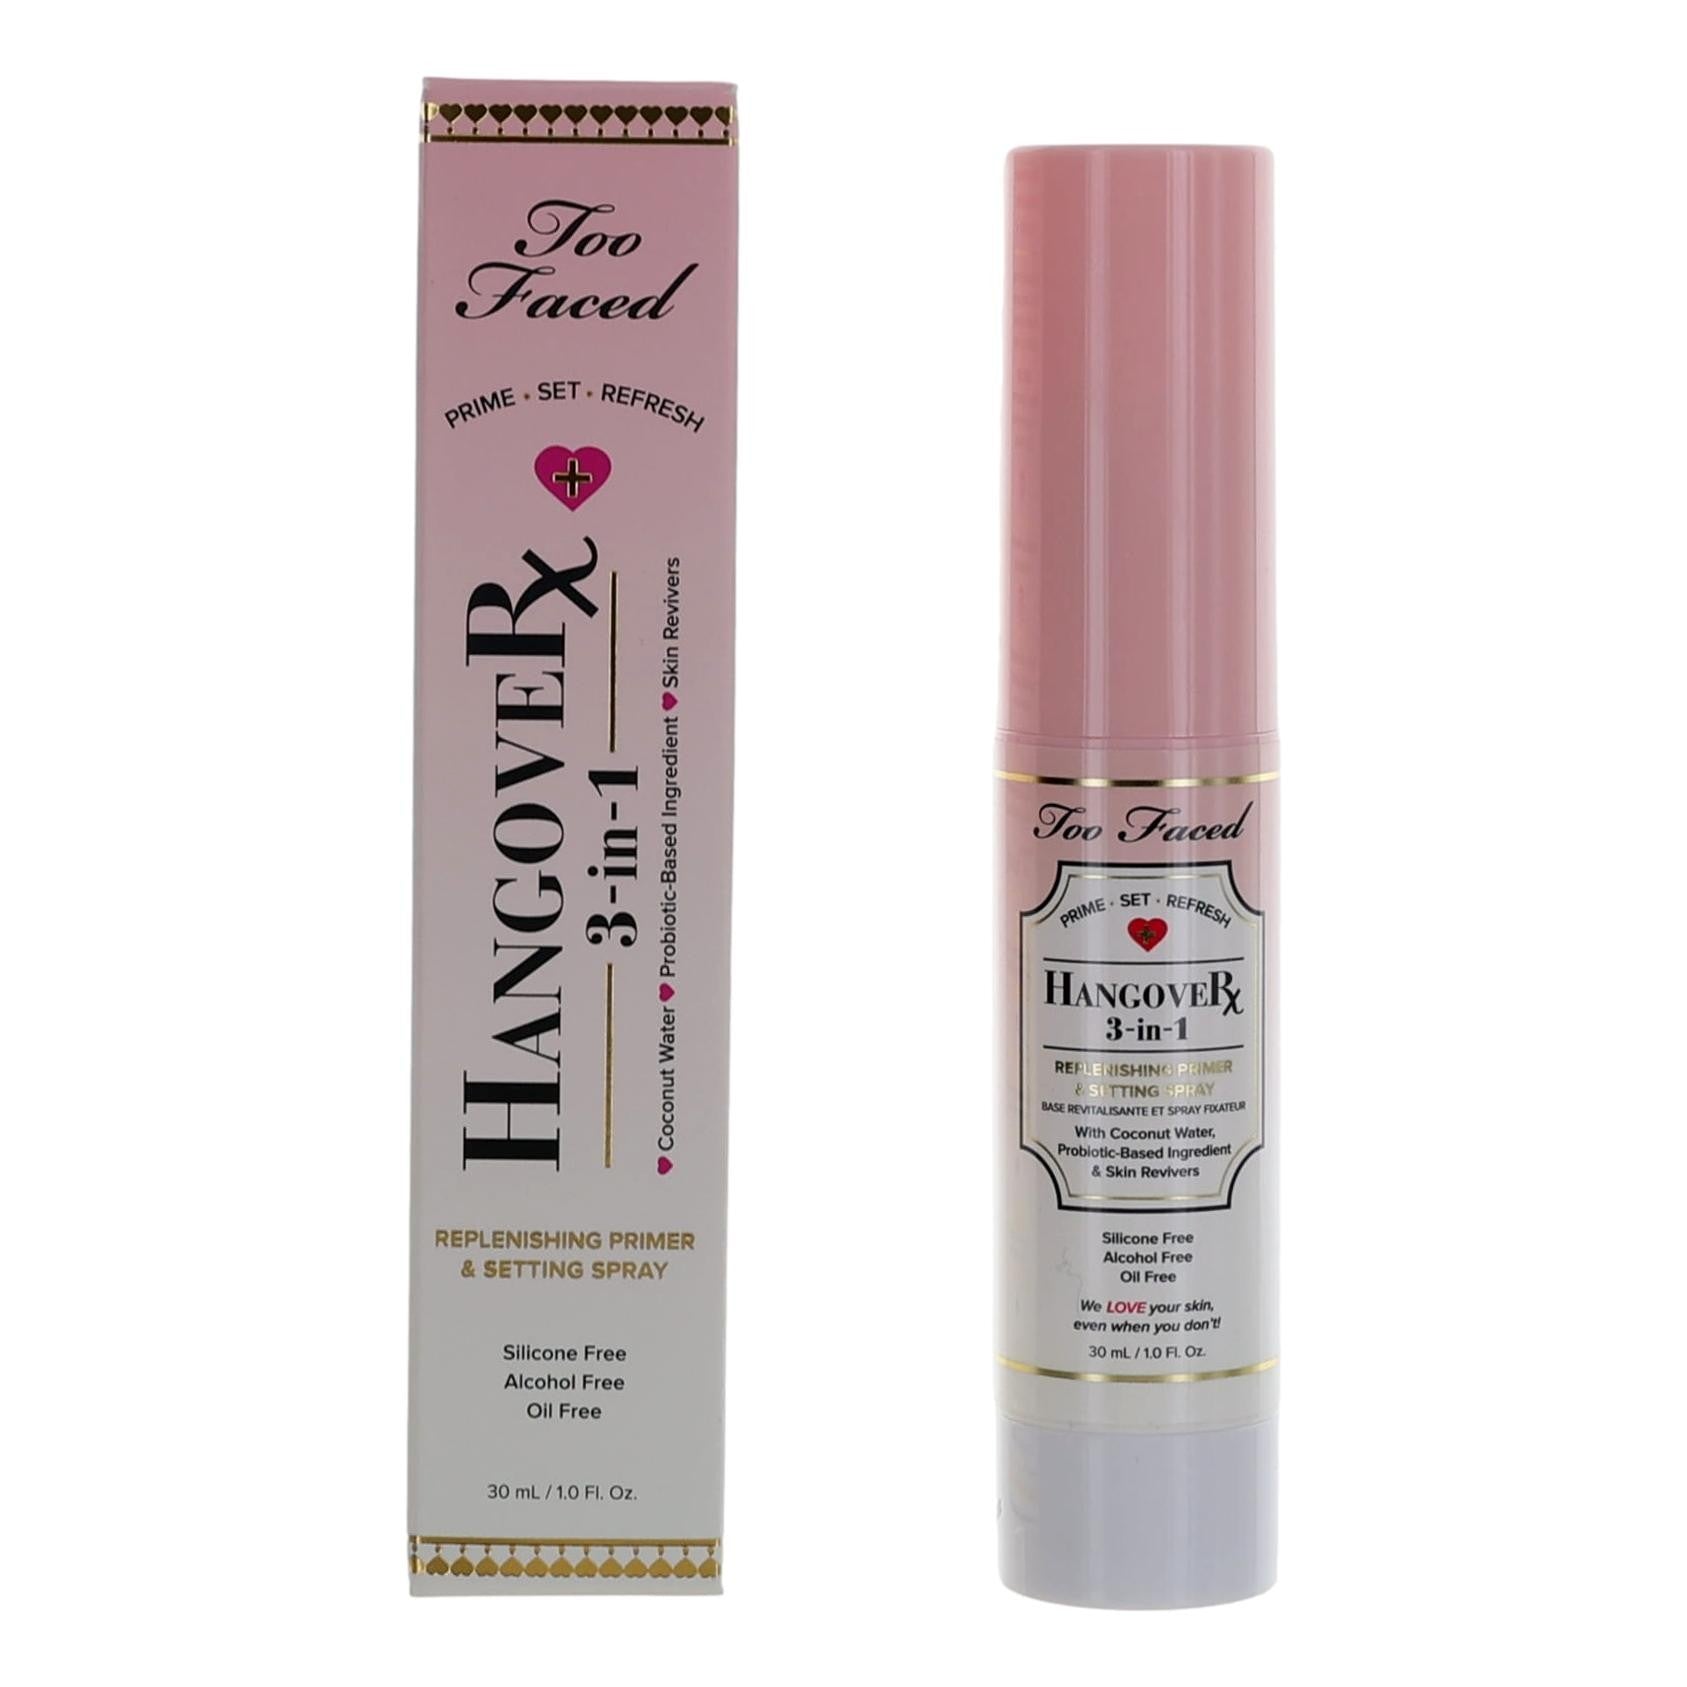 Too Faced Hangover Rx by Too Faced, 1oz 3-in-1 Primer and Setting Spray